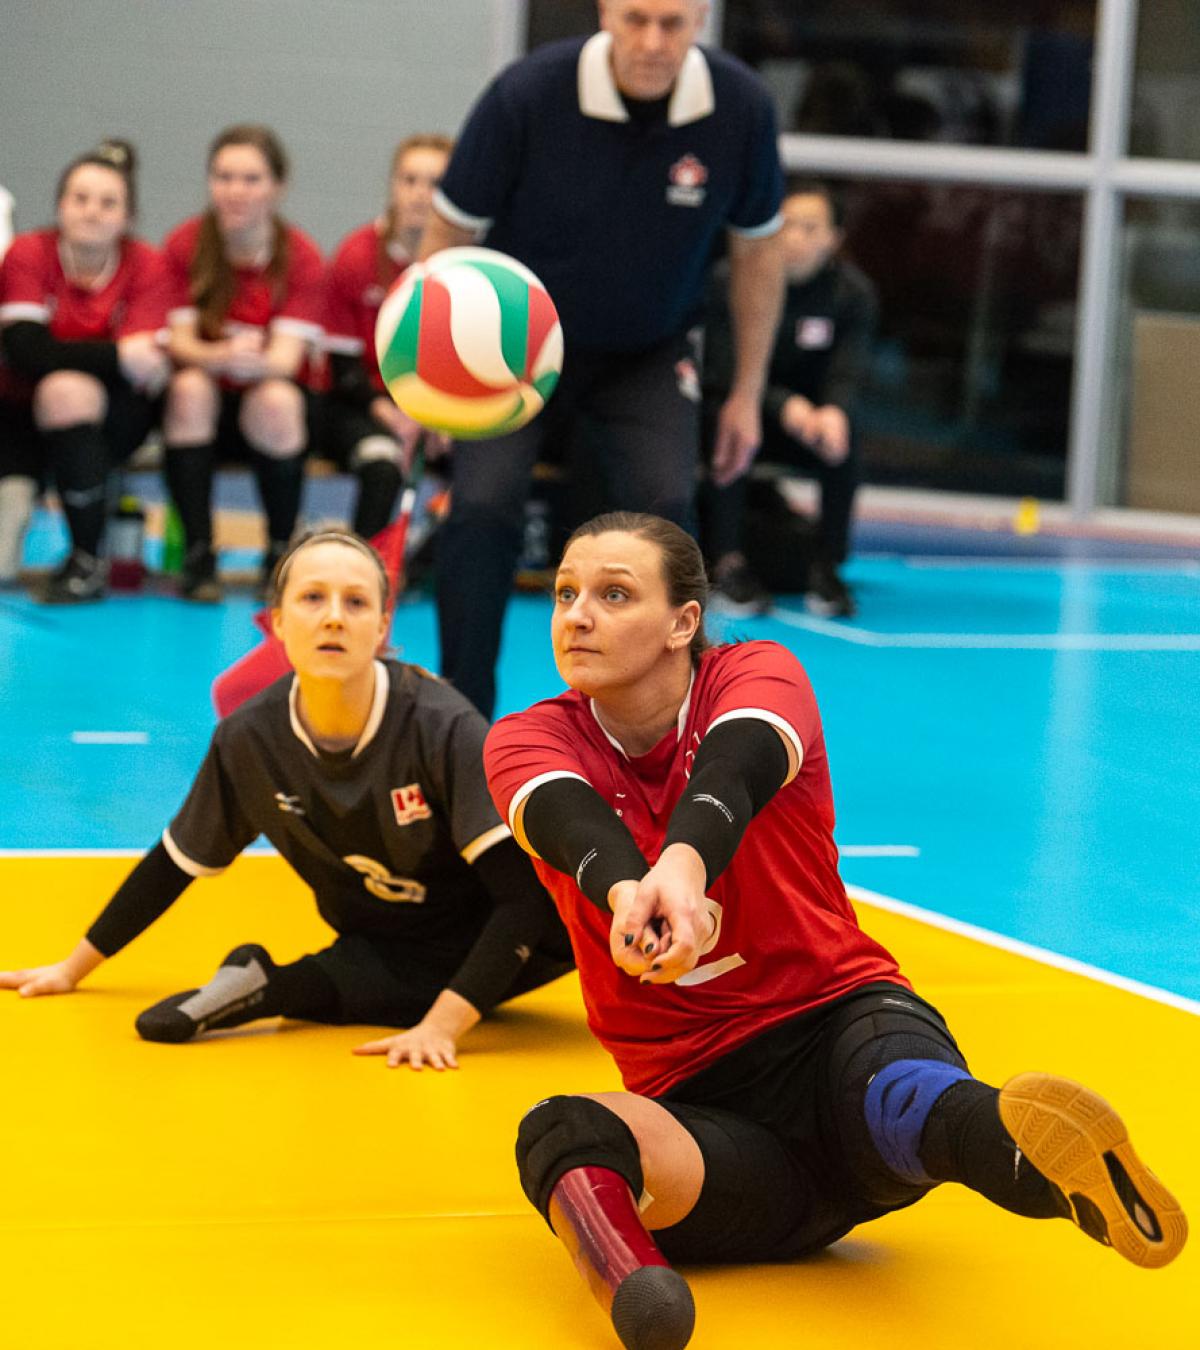 Female sitting volleyball player hits a bump